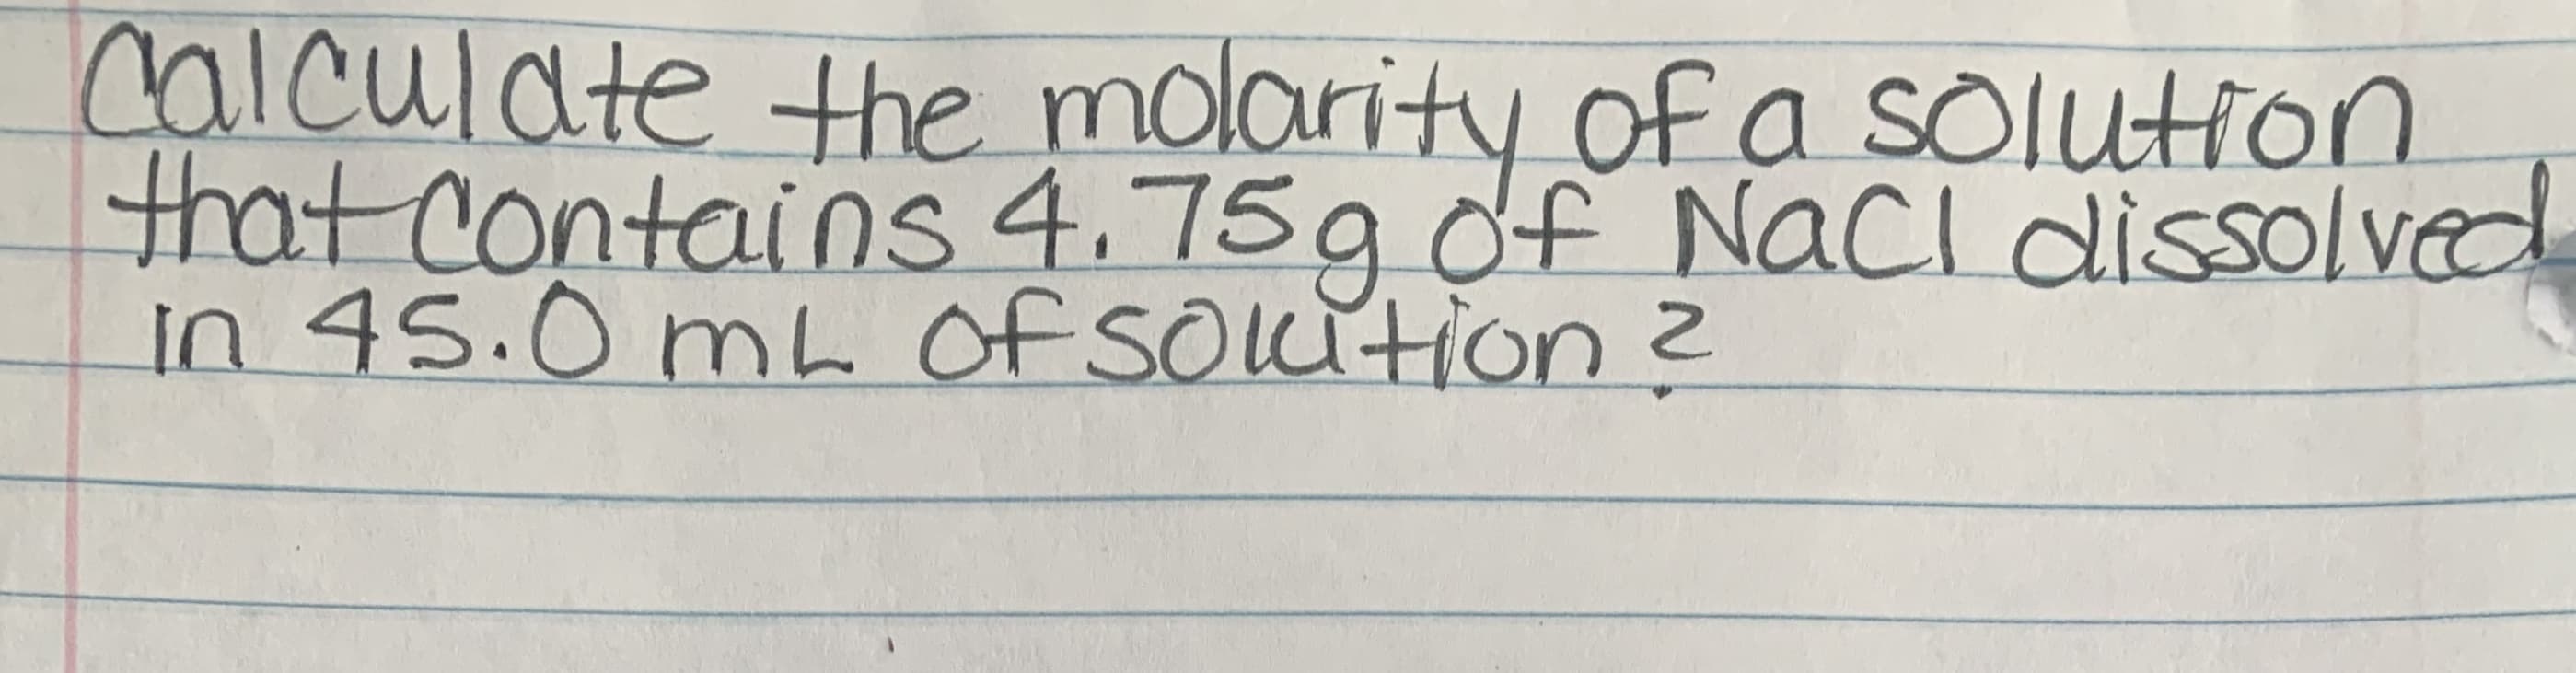 Calculate +he molarity of a Solution
that contains 4.759 df NacI dissolved
in 45.0 mL Of SOLition?
